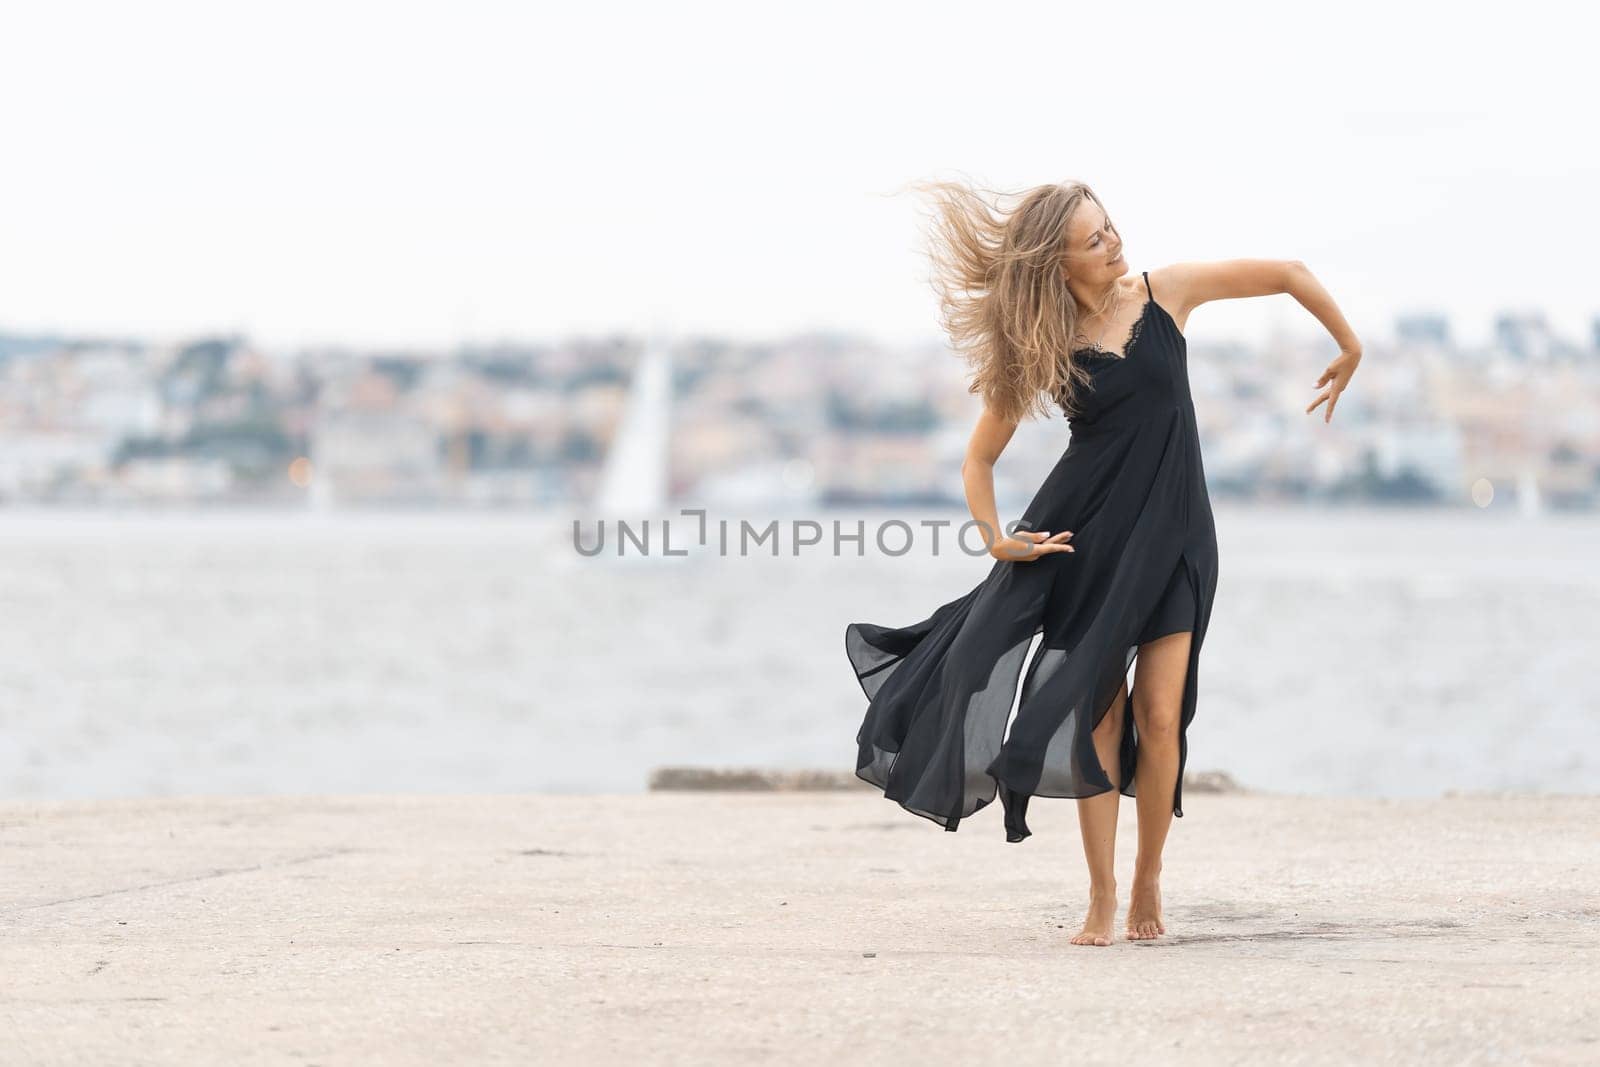 An adult smiling woman in black dress dancing ballet on the pier. Mid shot